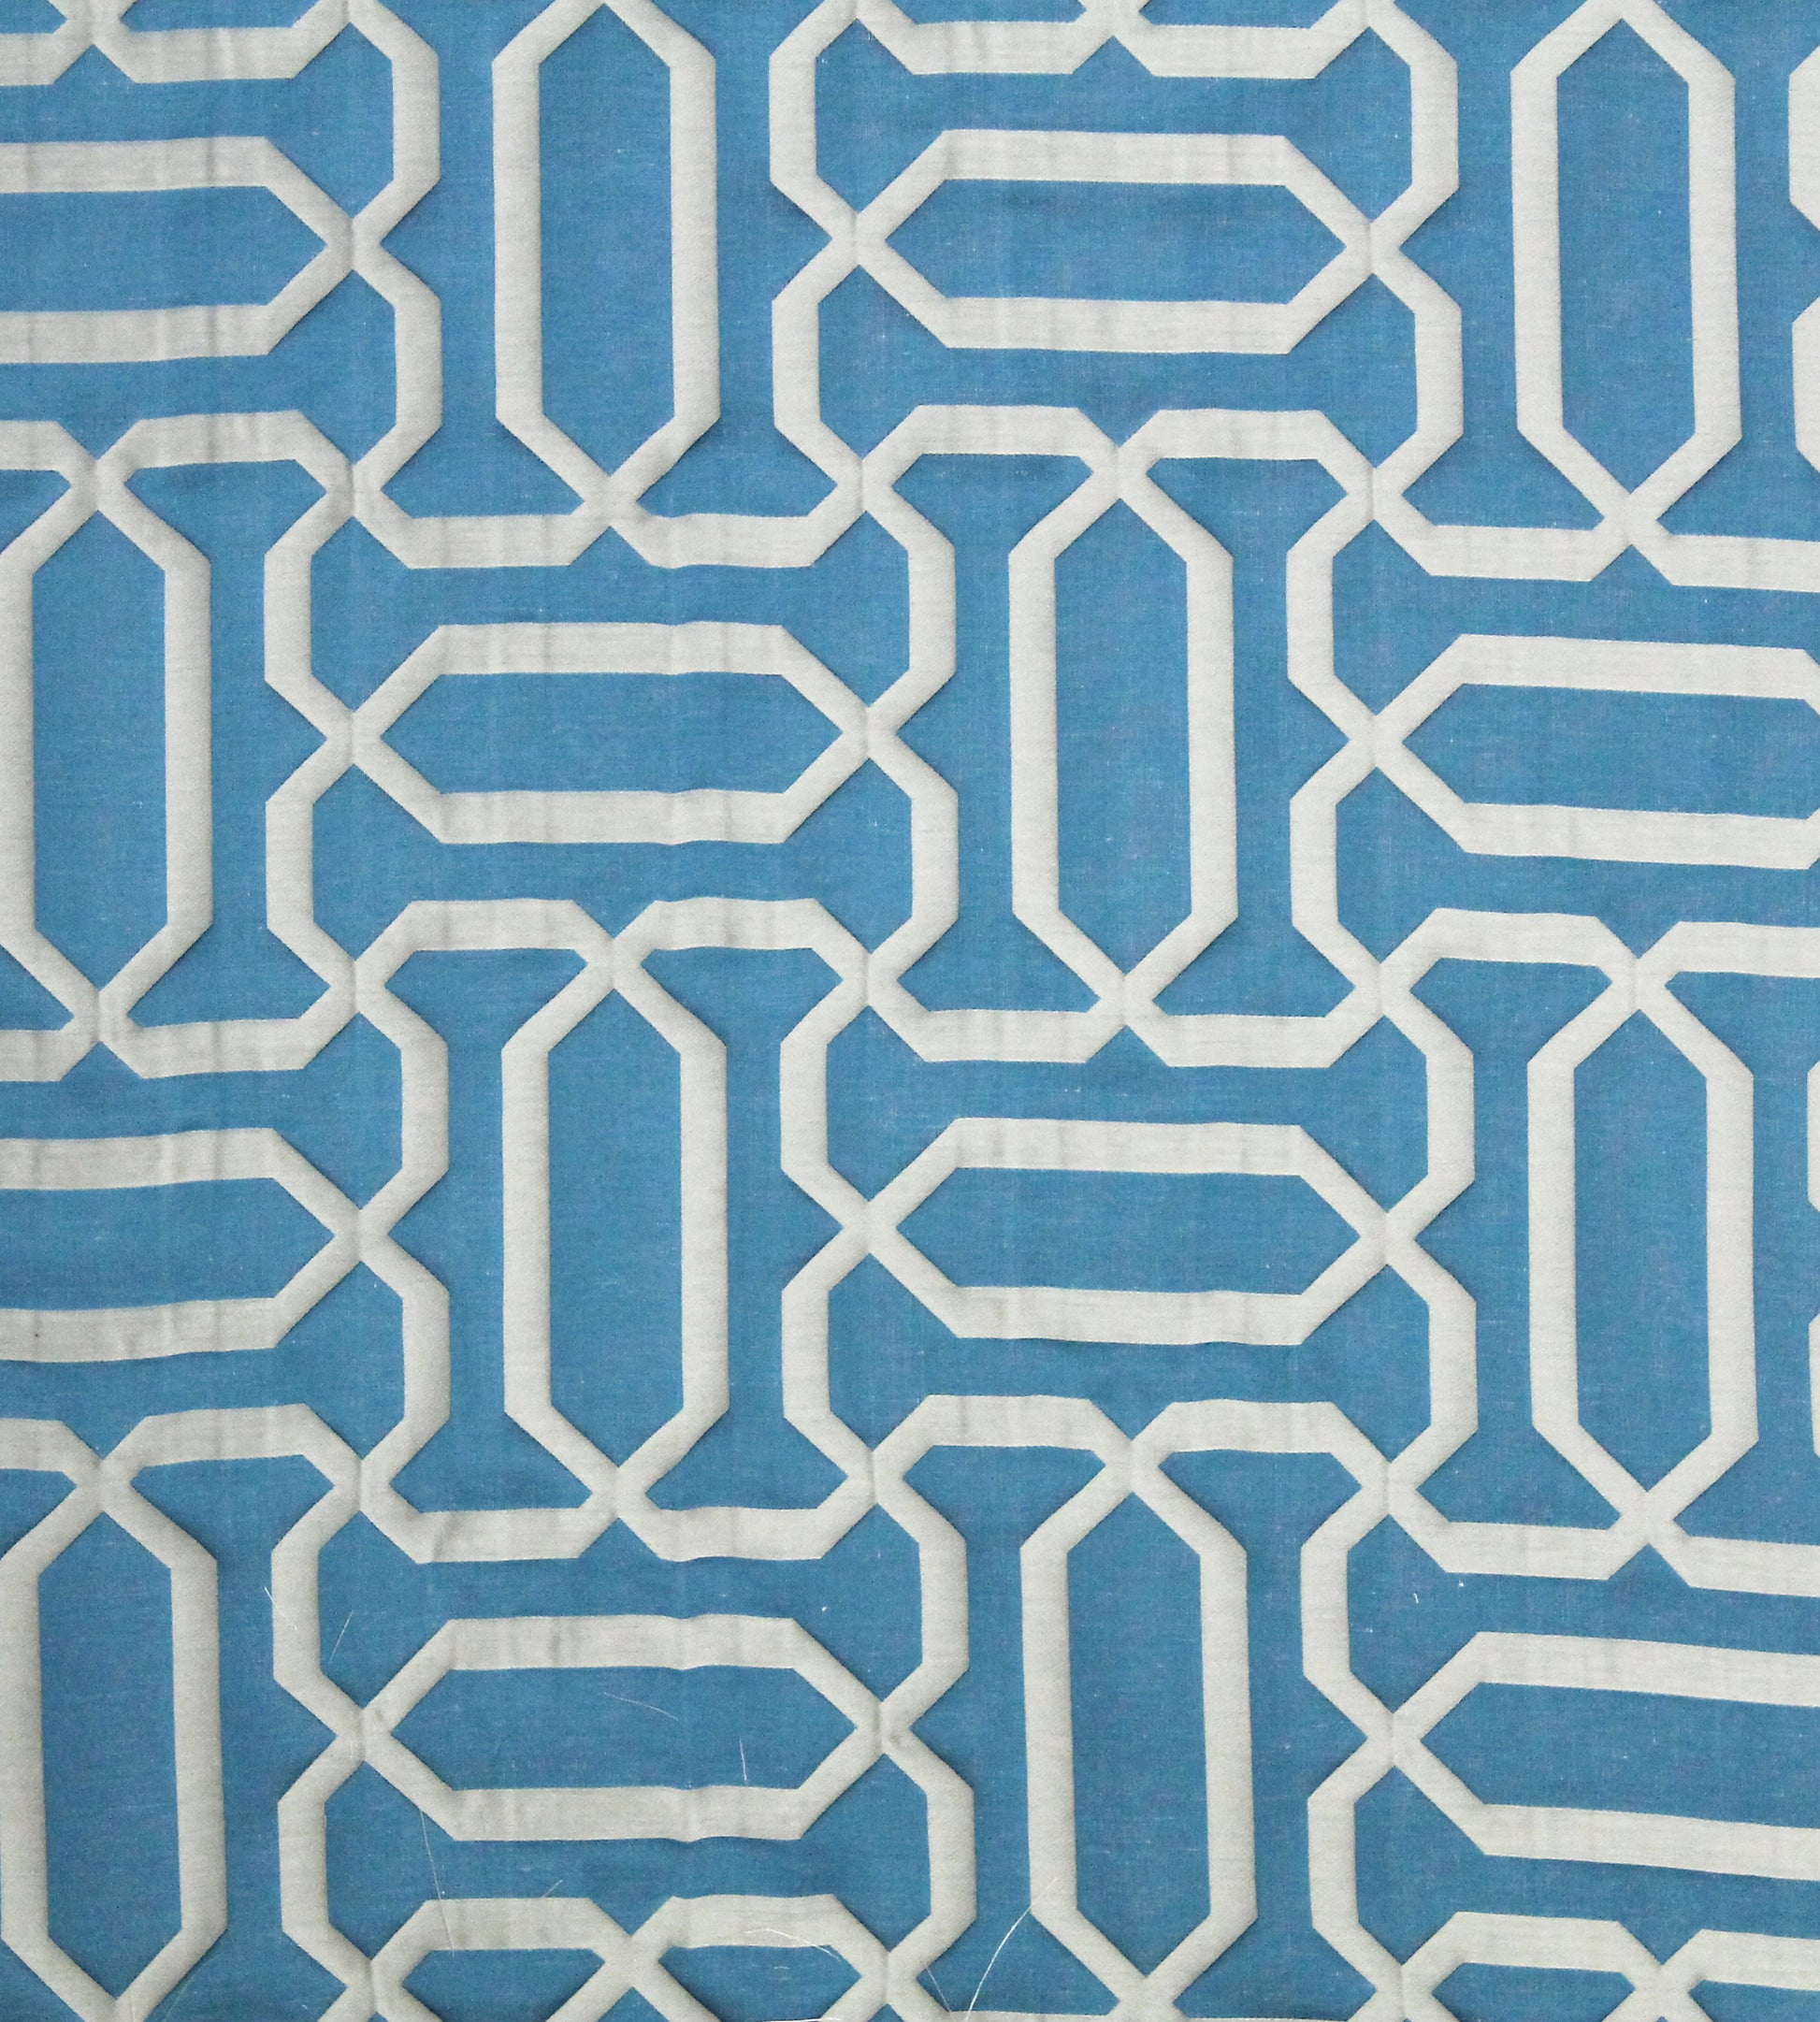 Purchase Old World Weavers Fabric Pattern number F3 00068030, Piazza Del Duomo Teal 1